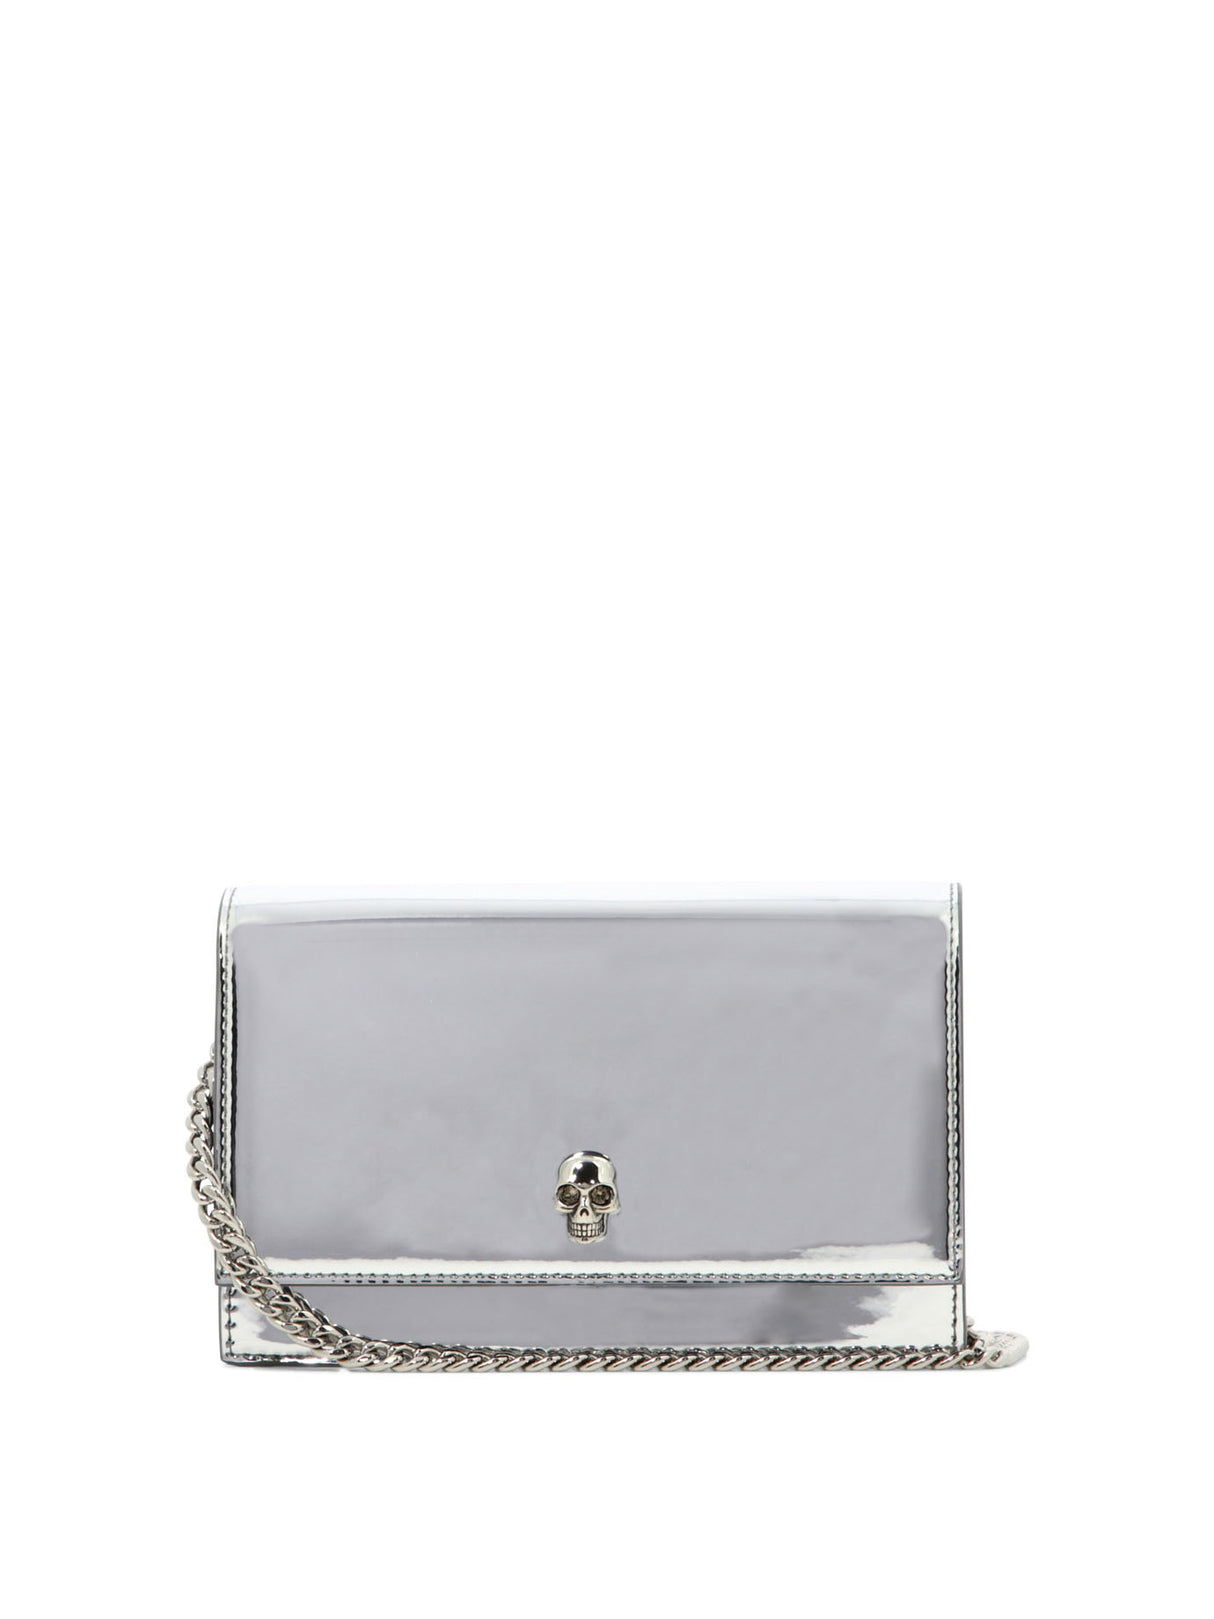 ALEXANDER MCQUEEN Mini Skull Gray Patent Leather Crossbody Bag with Chain Strap and Card Pocket for Women SS24